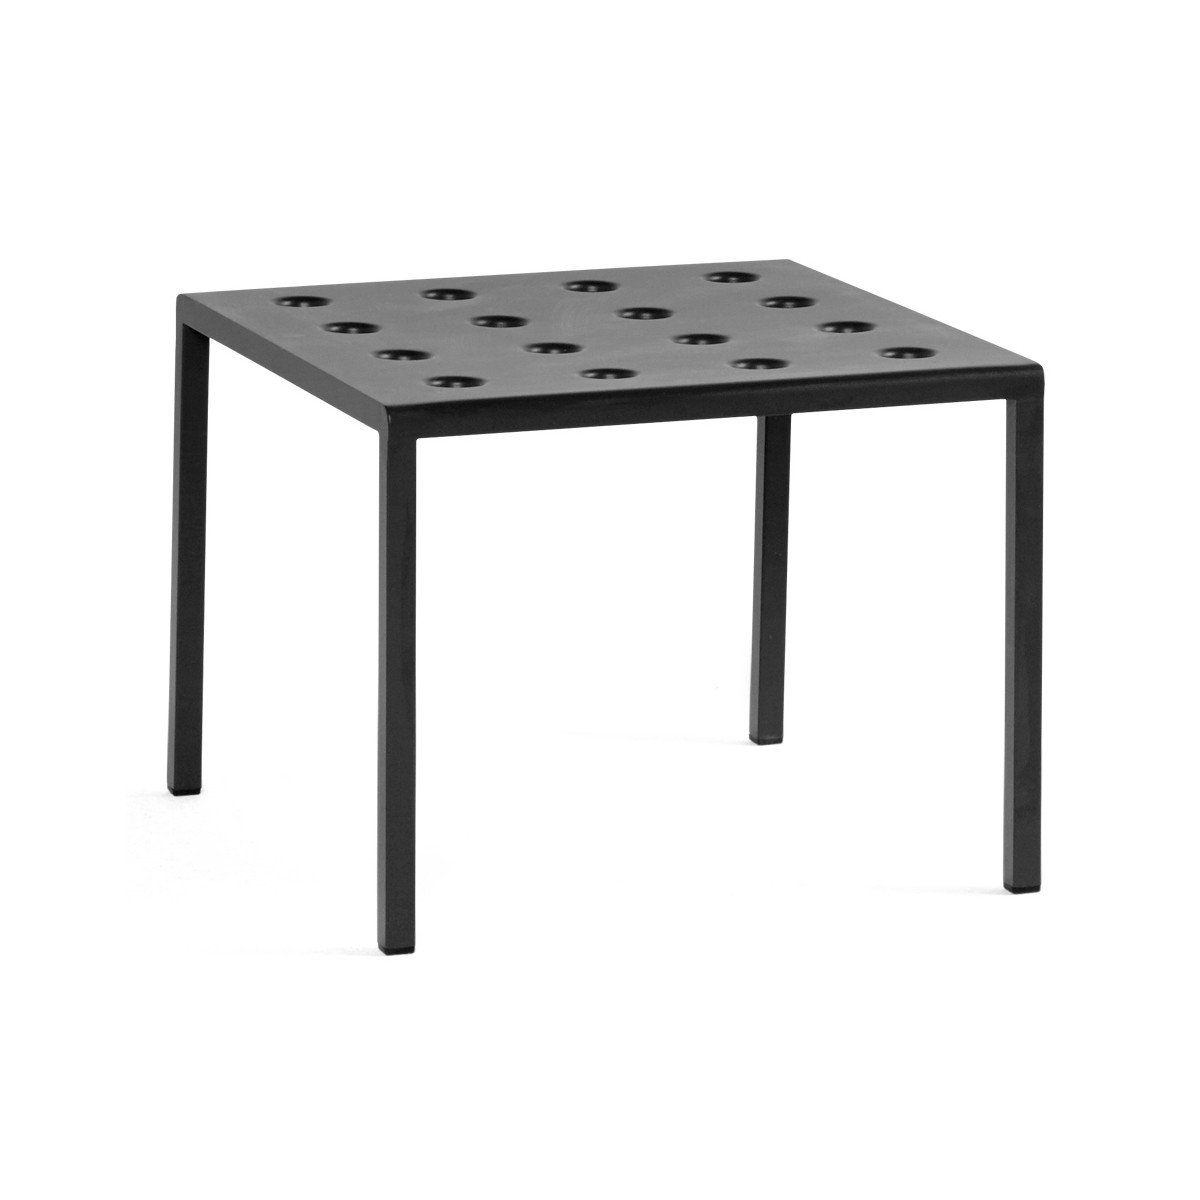 Anthracite – Table basse Balcony